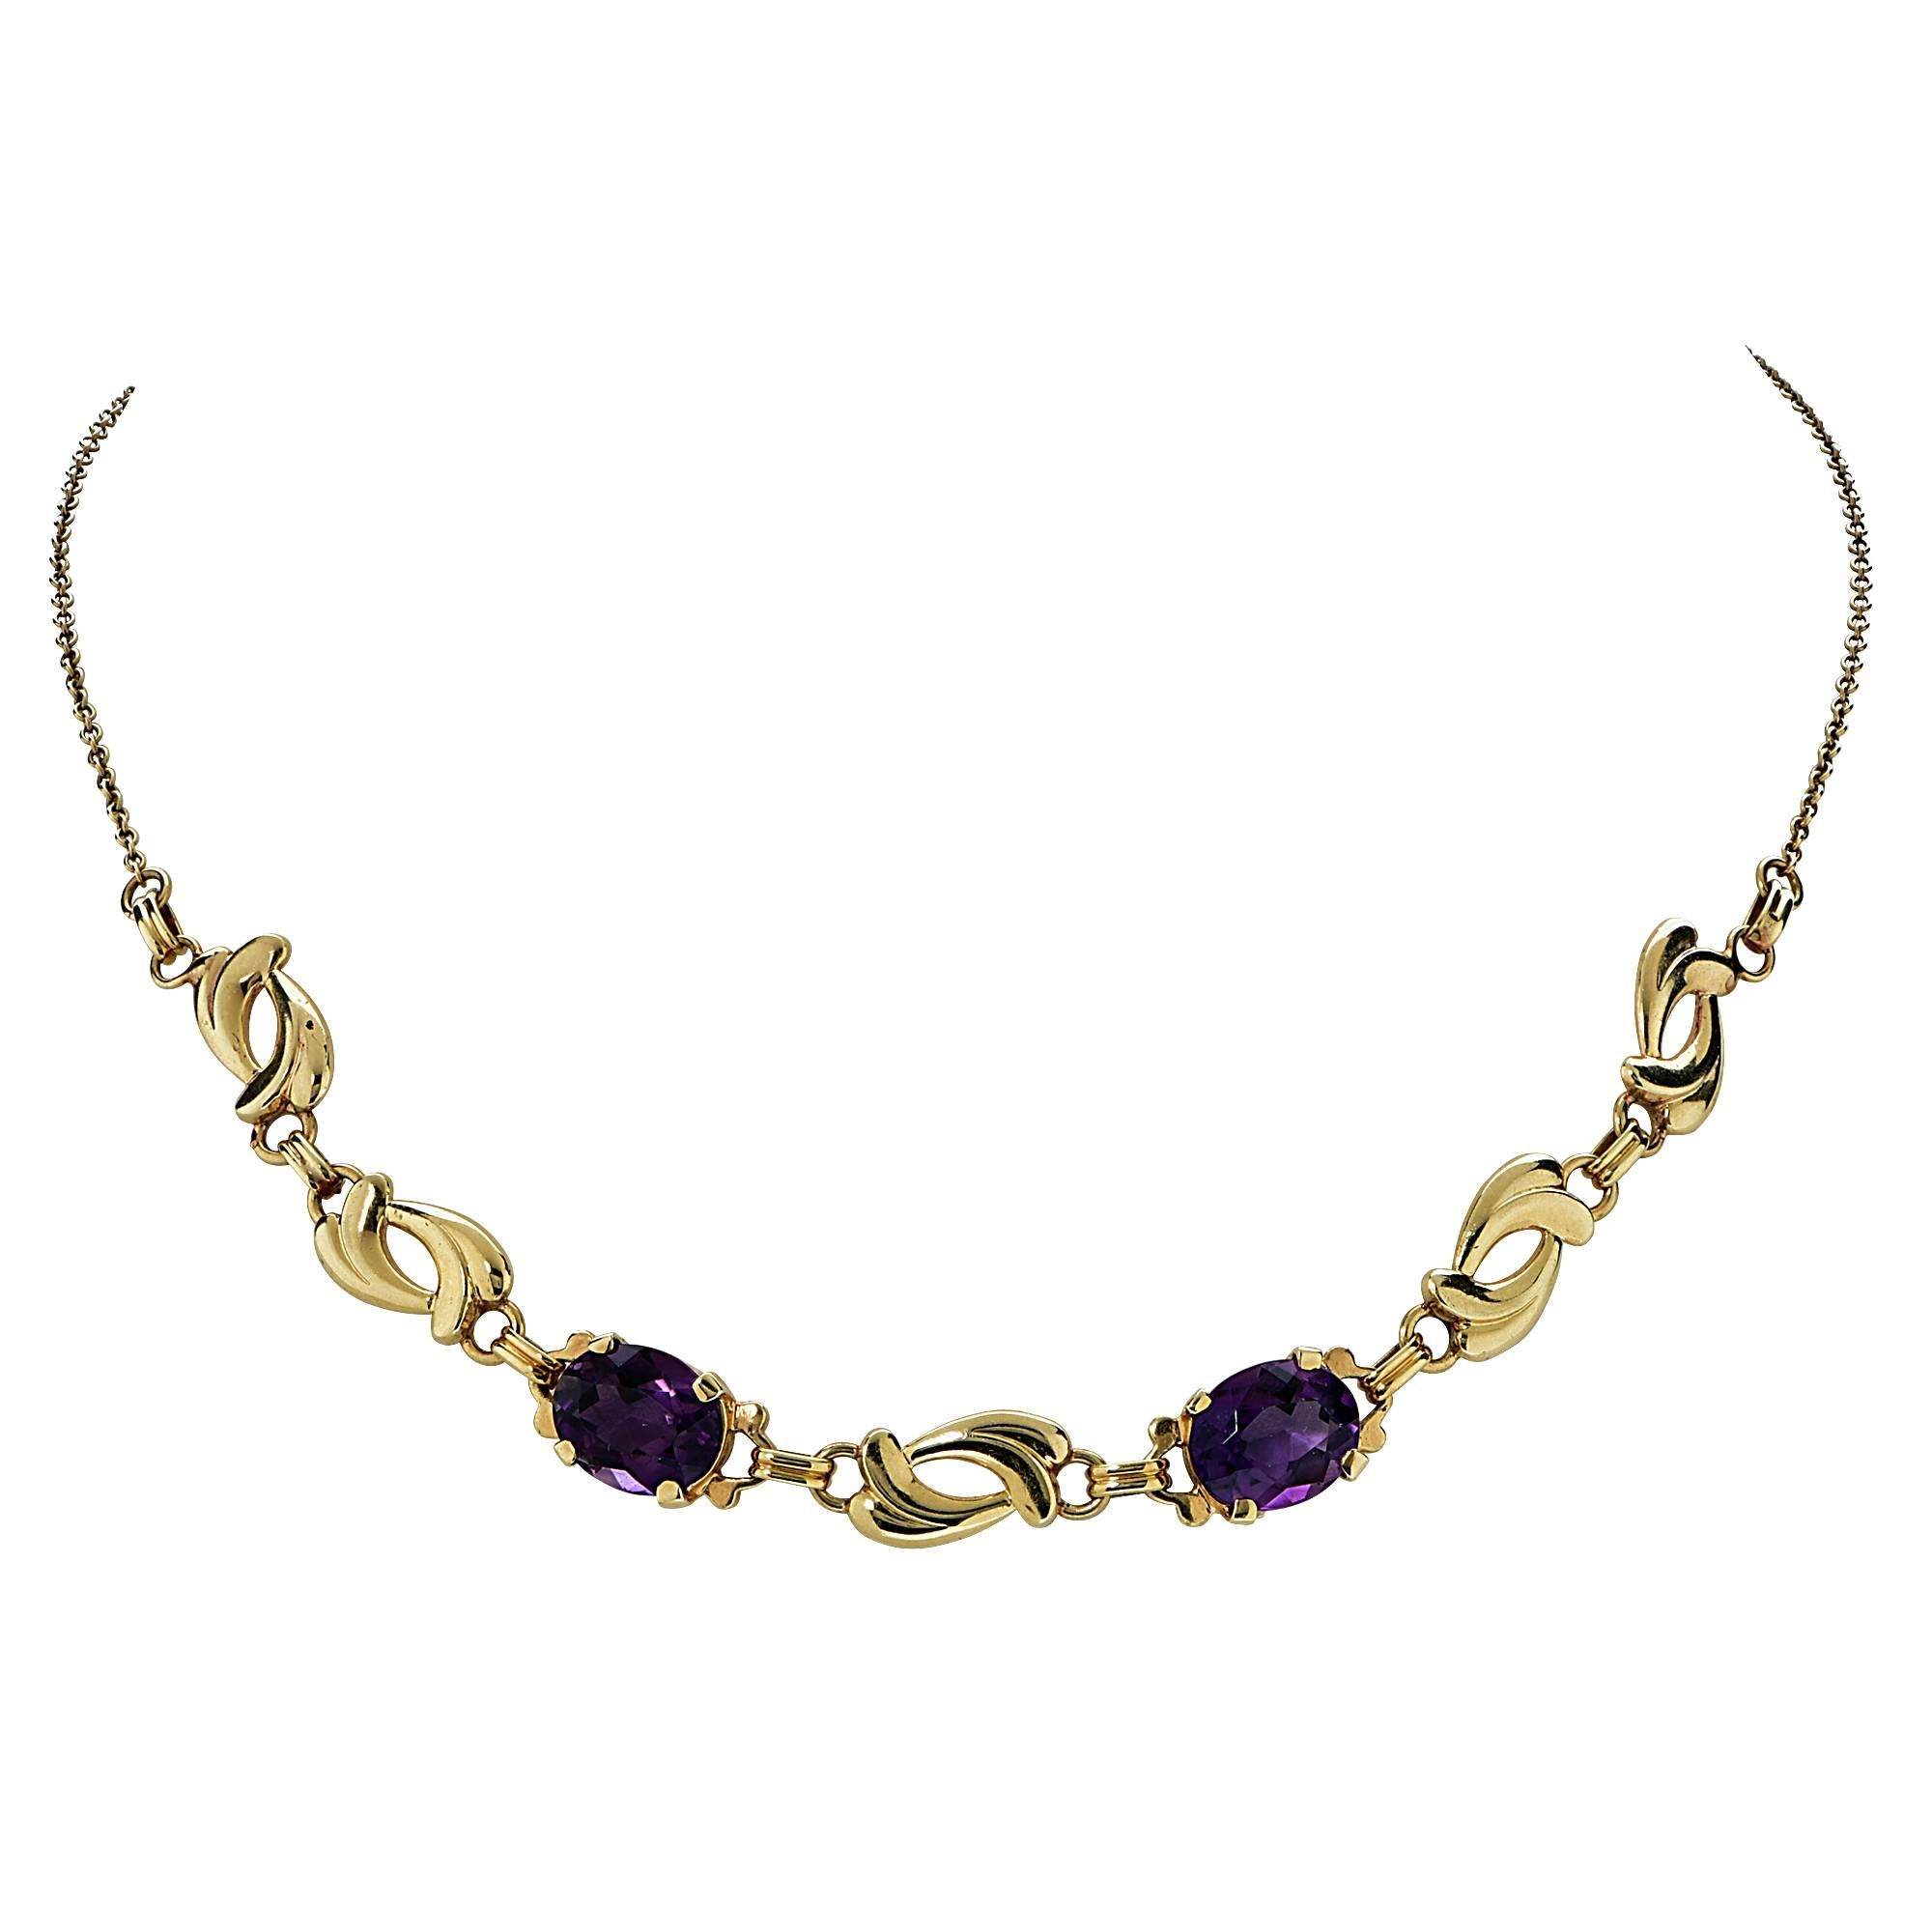 Women's Amethyst Gold Earring and Necklace Set